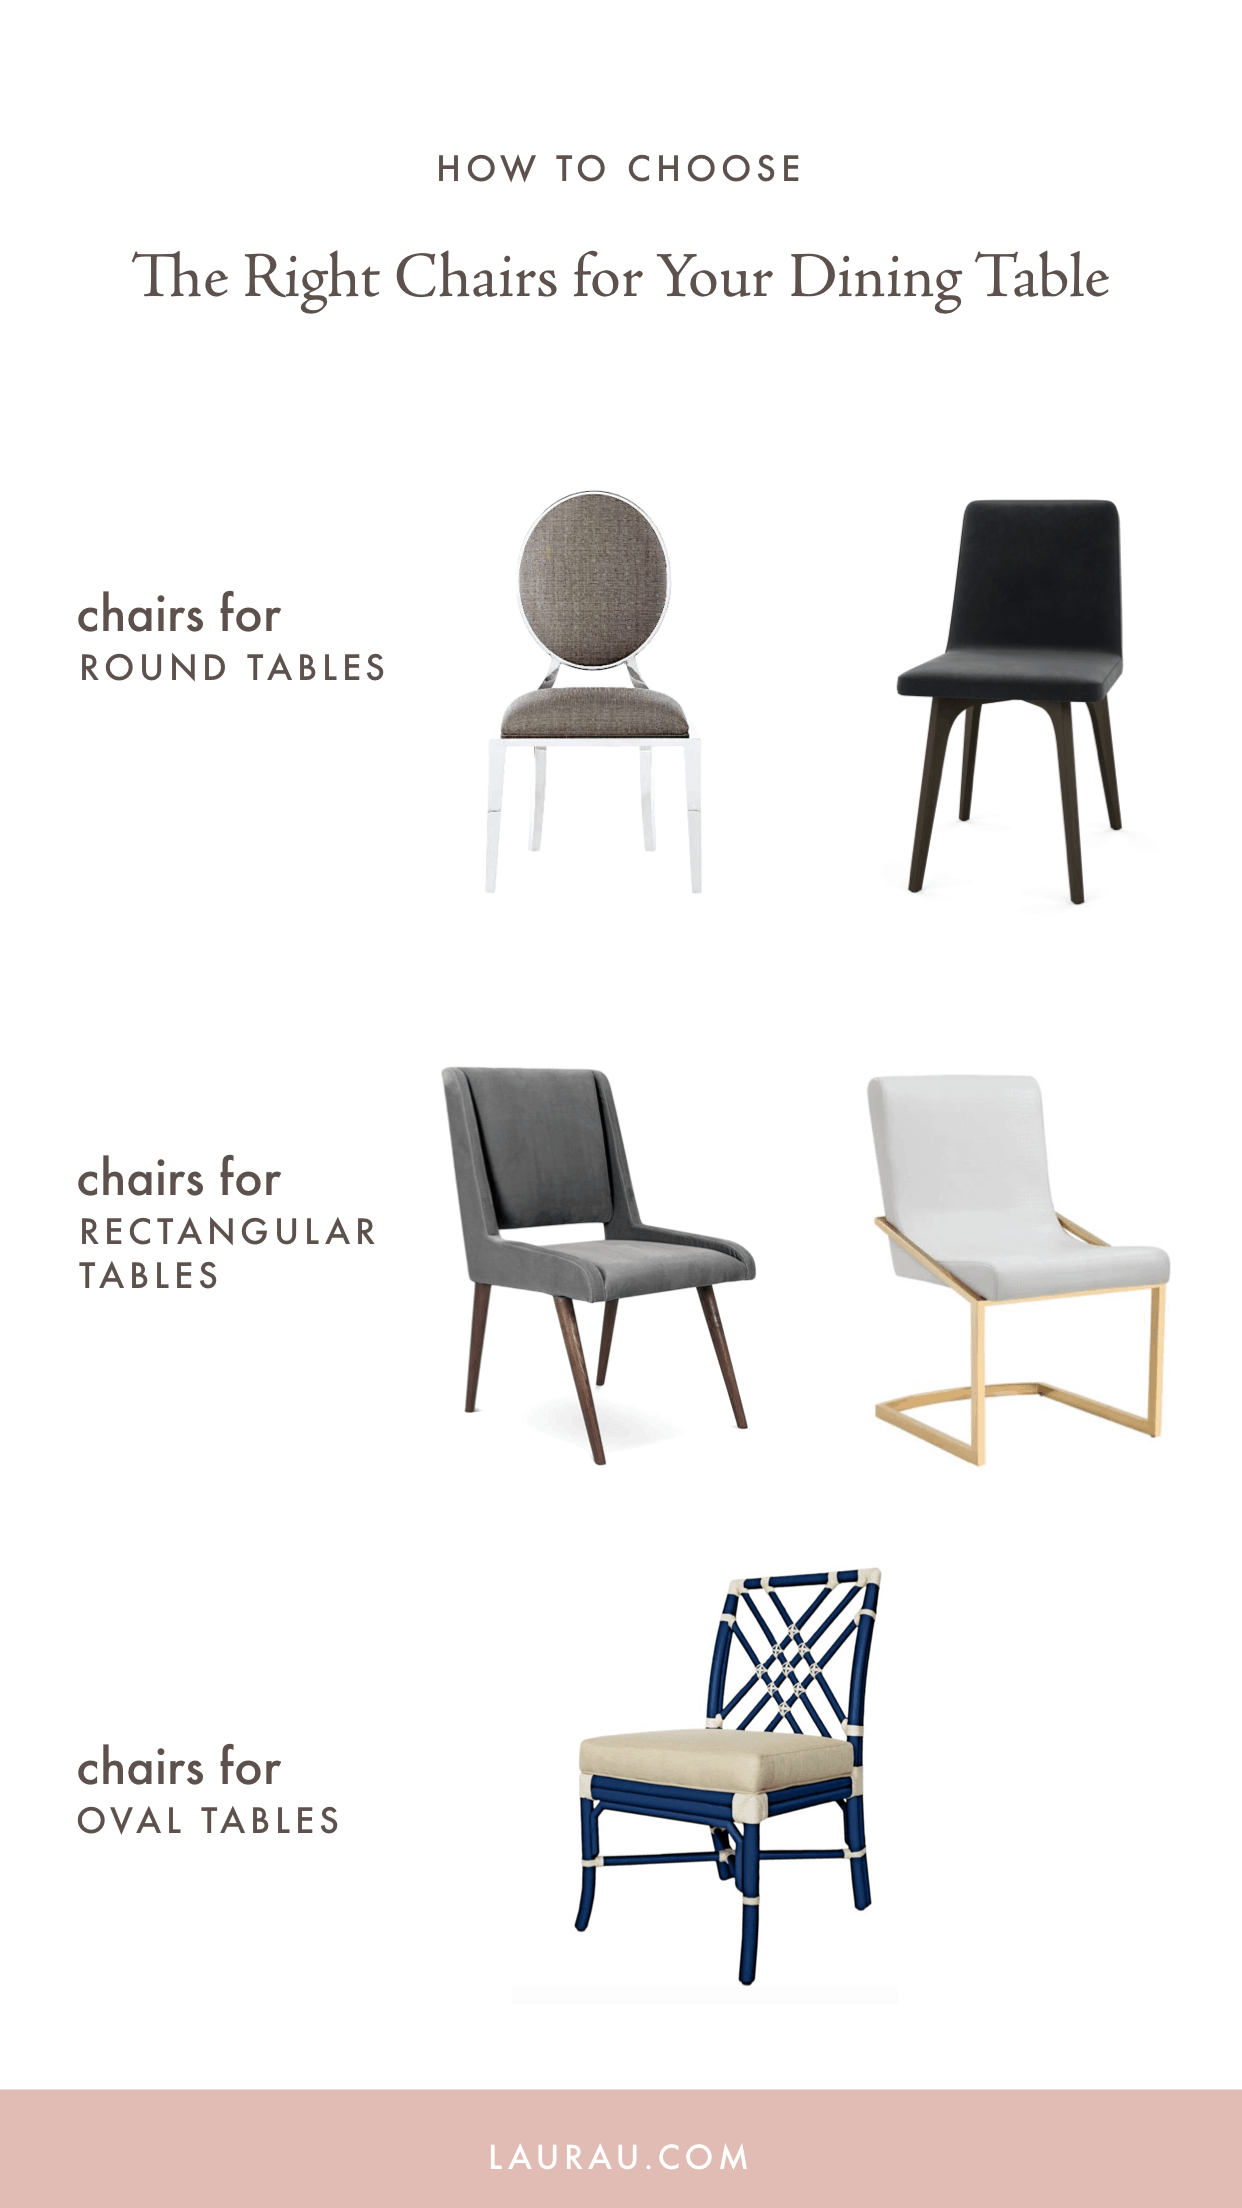 How to choose the right chairs for your dining table